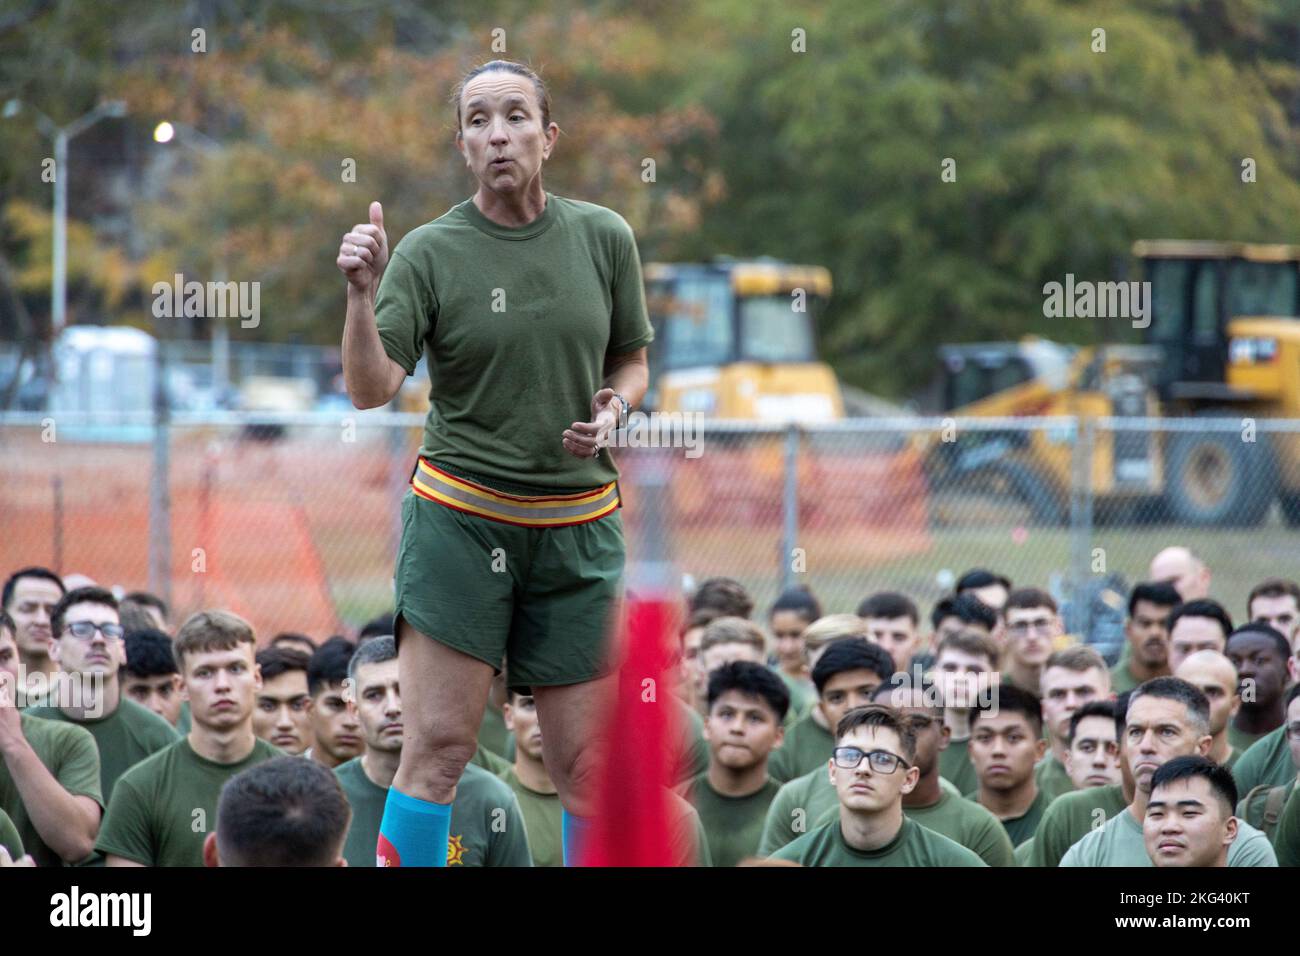 U.S. Marine Corps Col. Ginger E. Beals, the commanding officer of Combat Logistics Regiment (CLR) 2, 2nd Marine Logistics Group, speaks to her Marines after conducting a regimental run on Camp Lejeune, North Carolina, Oct. 28, 2022.  CLR-2 conducted a three-mile formation run with a Halloween theme, allowing Marines to wear socks of their choice, to boost morale and enhance unit cohesion within the regiment. Stock Photo